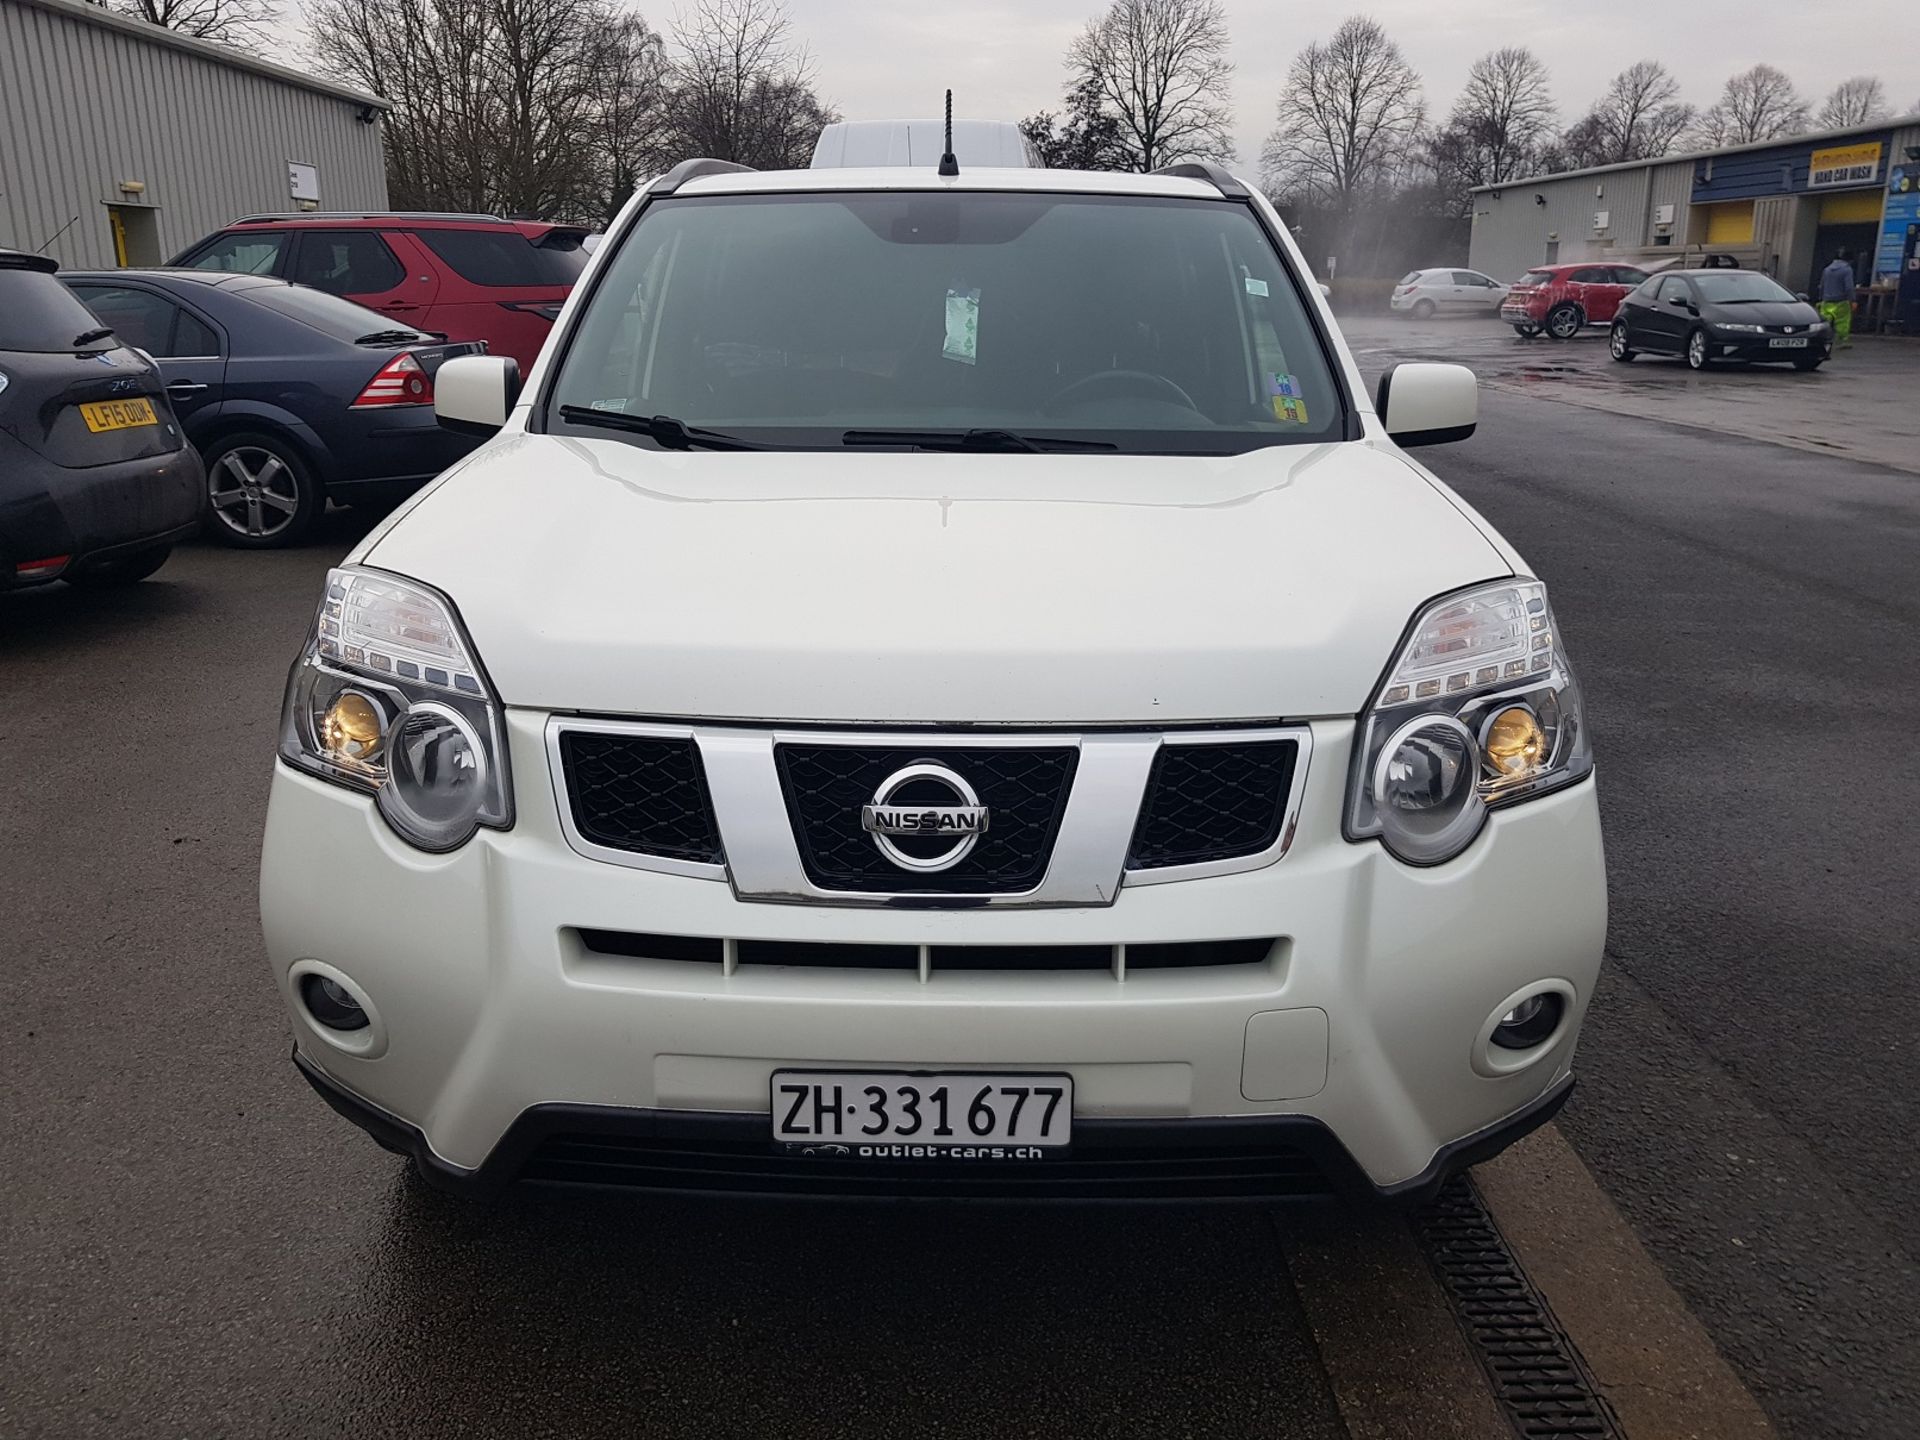 2012 NISSAN X-TRAIL 4X4 2.0 DIESEL AUTOMATIC, LEFT HAND DRIVE - REGISTERED IN SWITZERLAND *NO VAT* - Image 2 of 20